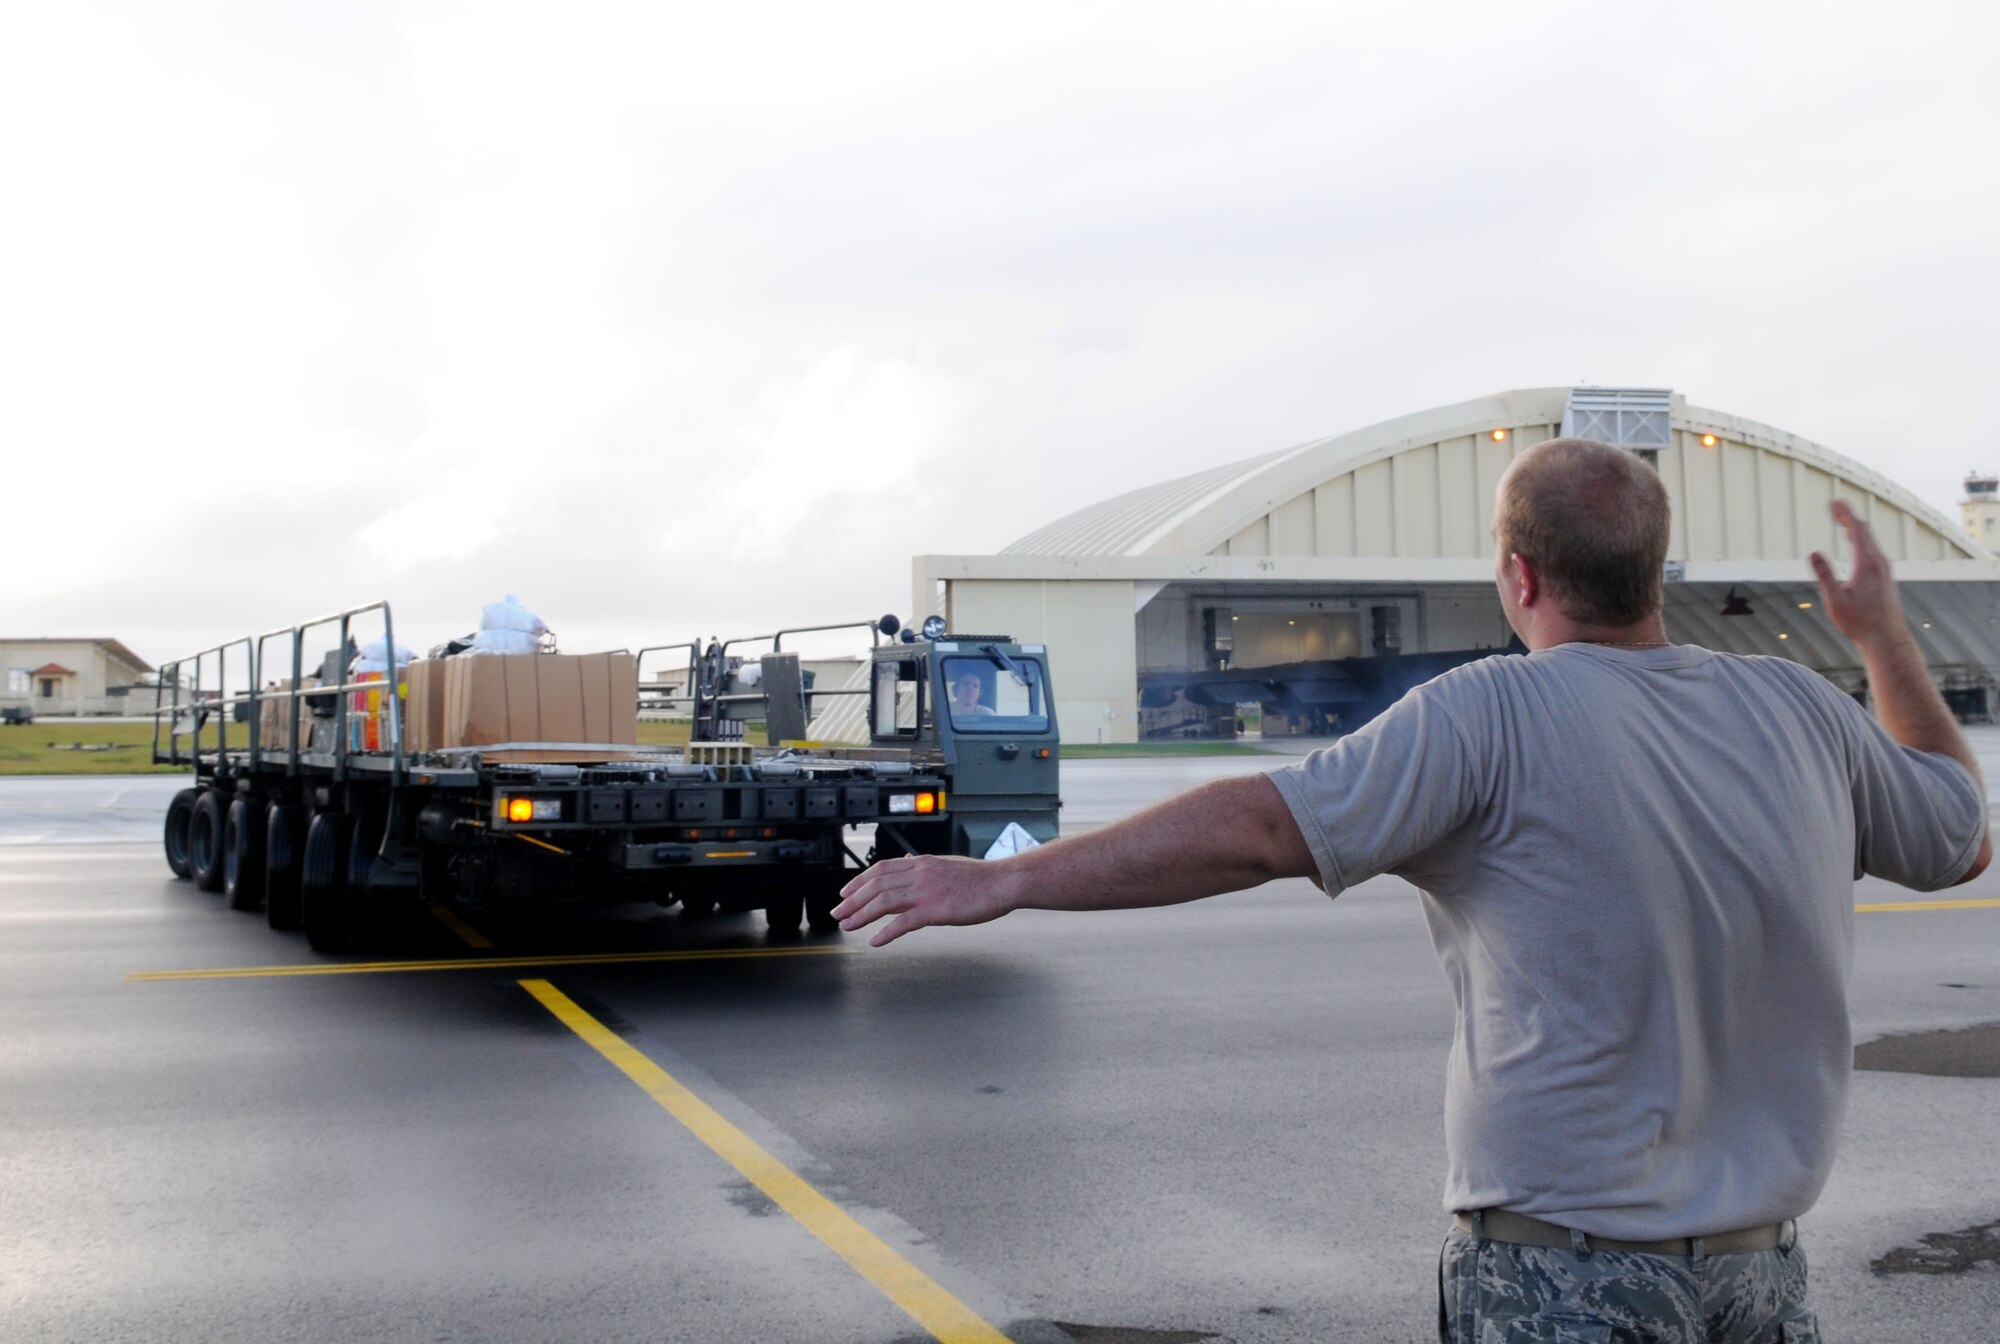 An Airman from the 36th Airlift Squadron, Yokota Air Base, Japan, loads boxes of humanitarian assistants goods onto a C-130 Hercules prior to take-off from Andersen Air Force Base, Guam, Dec. 14. This year more than 60 boxes will be dropped to 55 Island weighing in at more than 20,000 pounds. Operation Christmas Drop is the Air Force?s longest-running humanitarian which began in 1952. Airmen today continue the tradition delivering supplies to remote islands of the Commonwealth of the Northern Marianas Islands, Yap, Palau, Chuuk and Pohnpei. (U.S. Air Force photo/ Senior Airman Nichelle Anderson)   